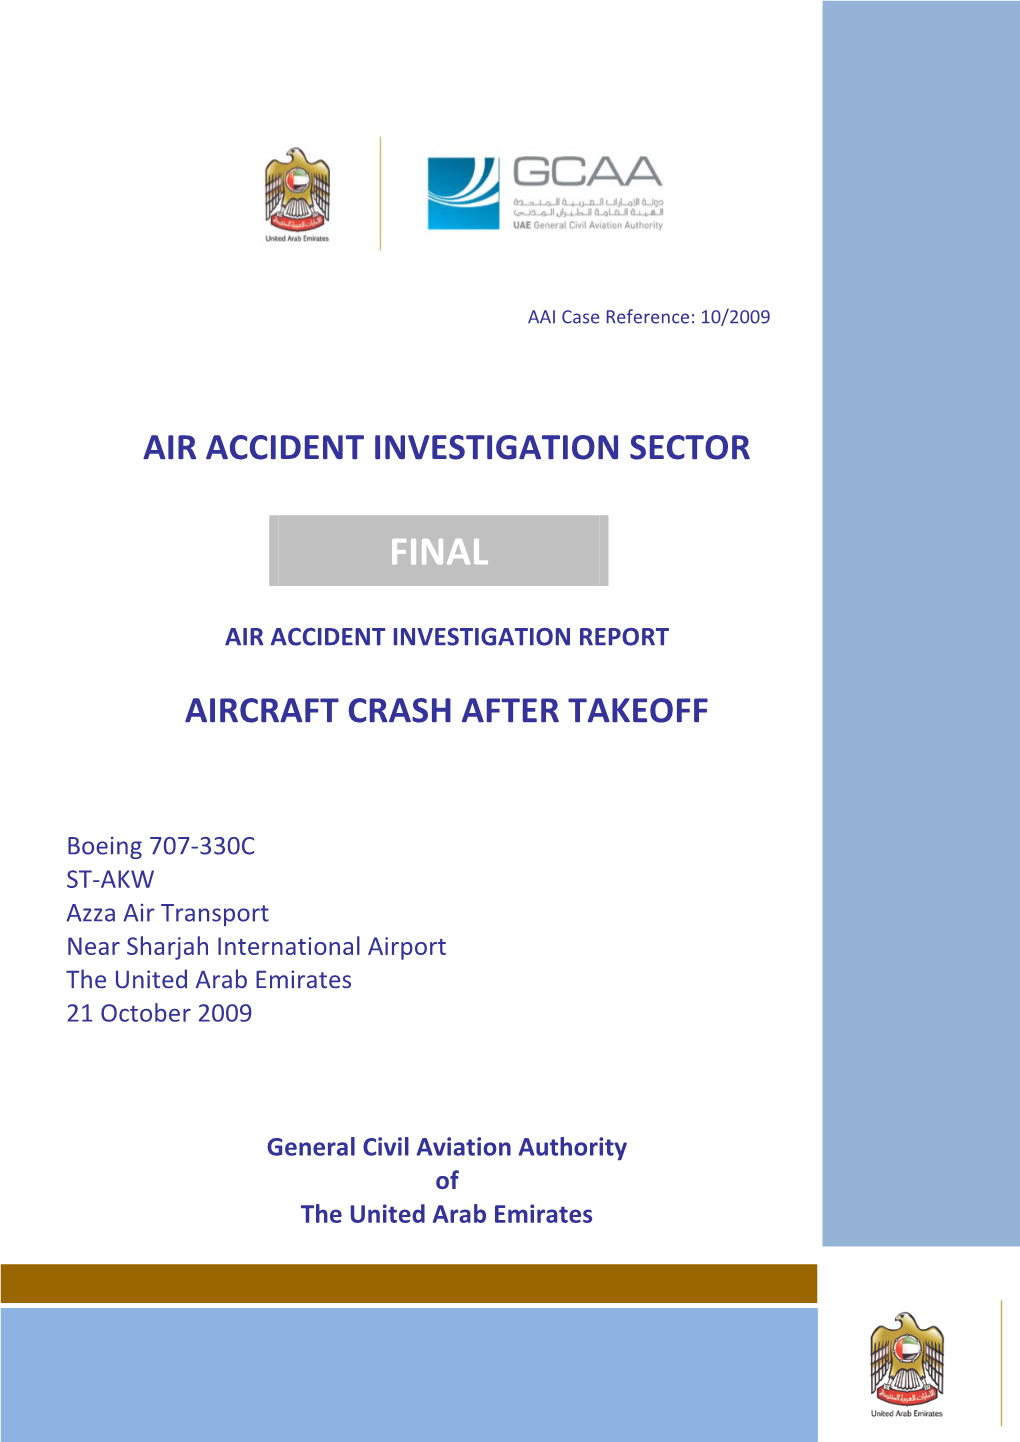 FINAL REPORT 10/2009, DATED 12 March 2013 Ii